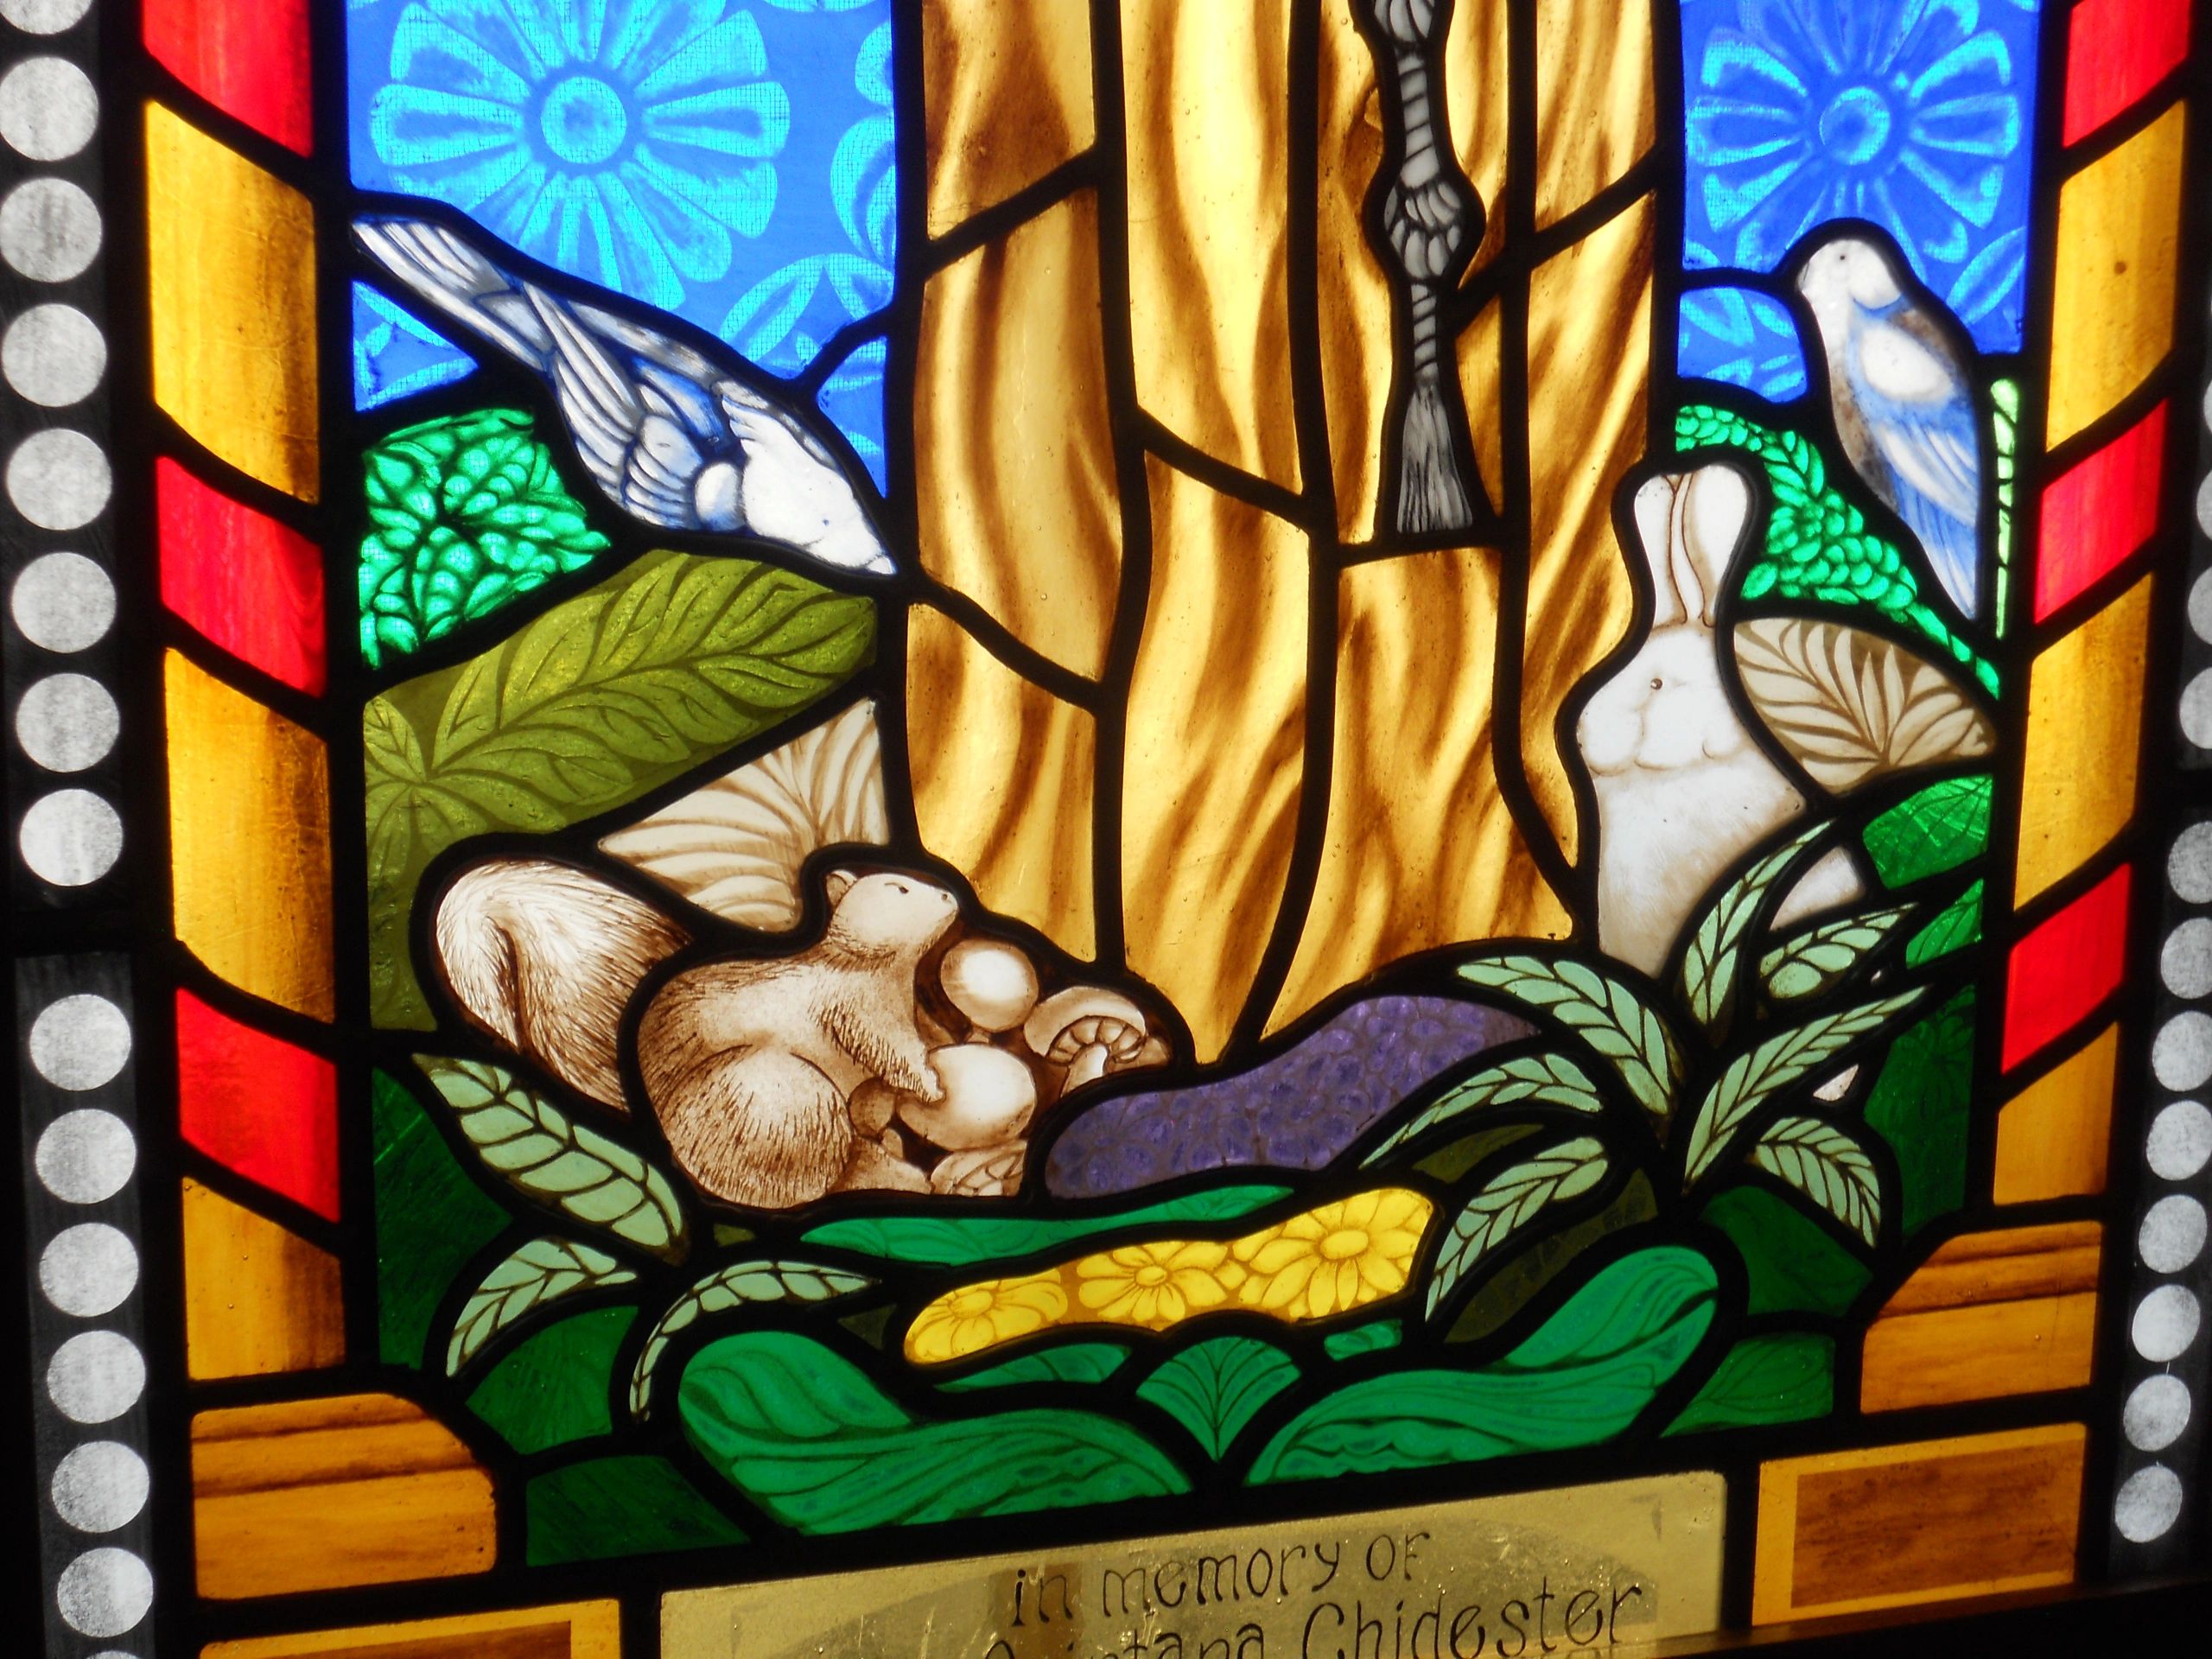 Painted glass rabbit, squirrel, and two birds at the feet of St. Francis of Assisi